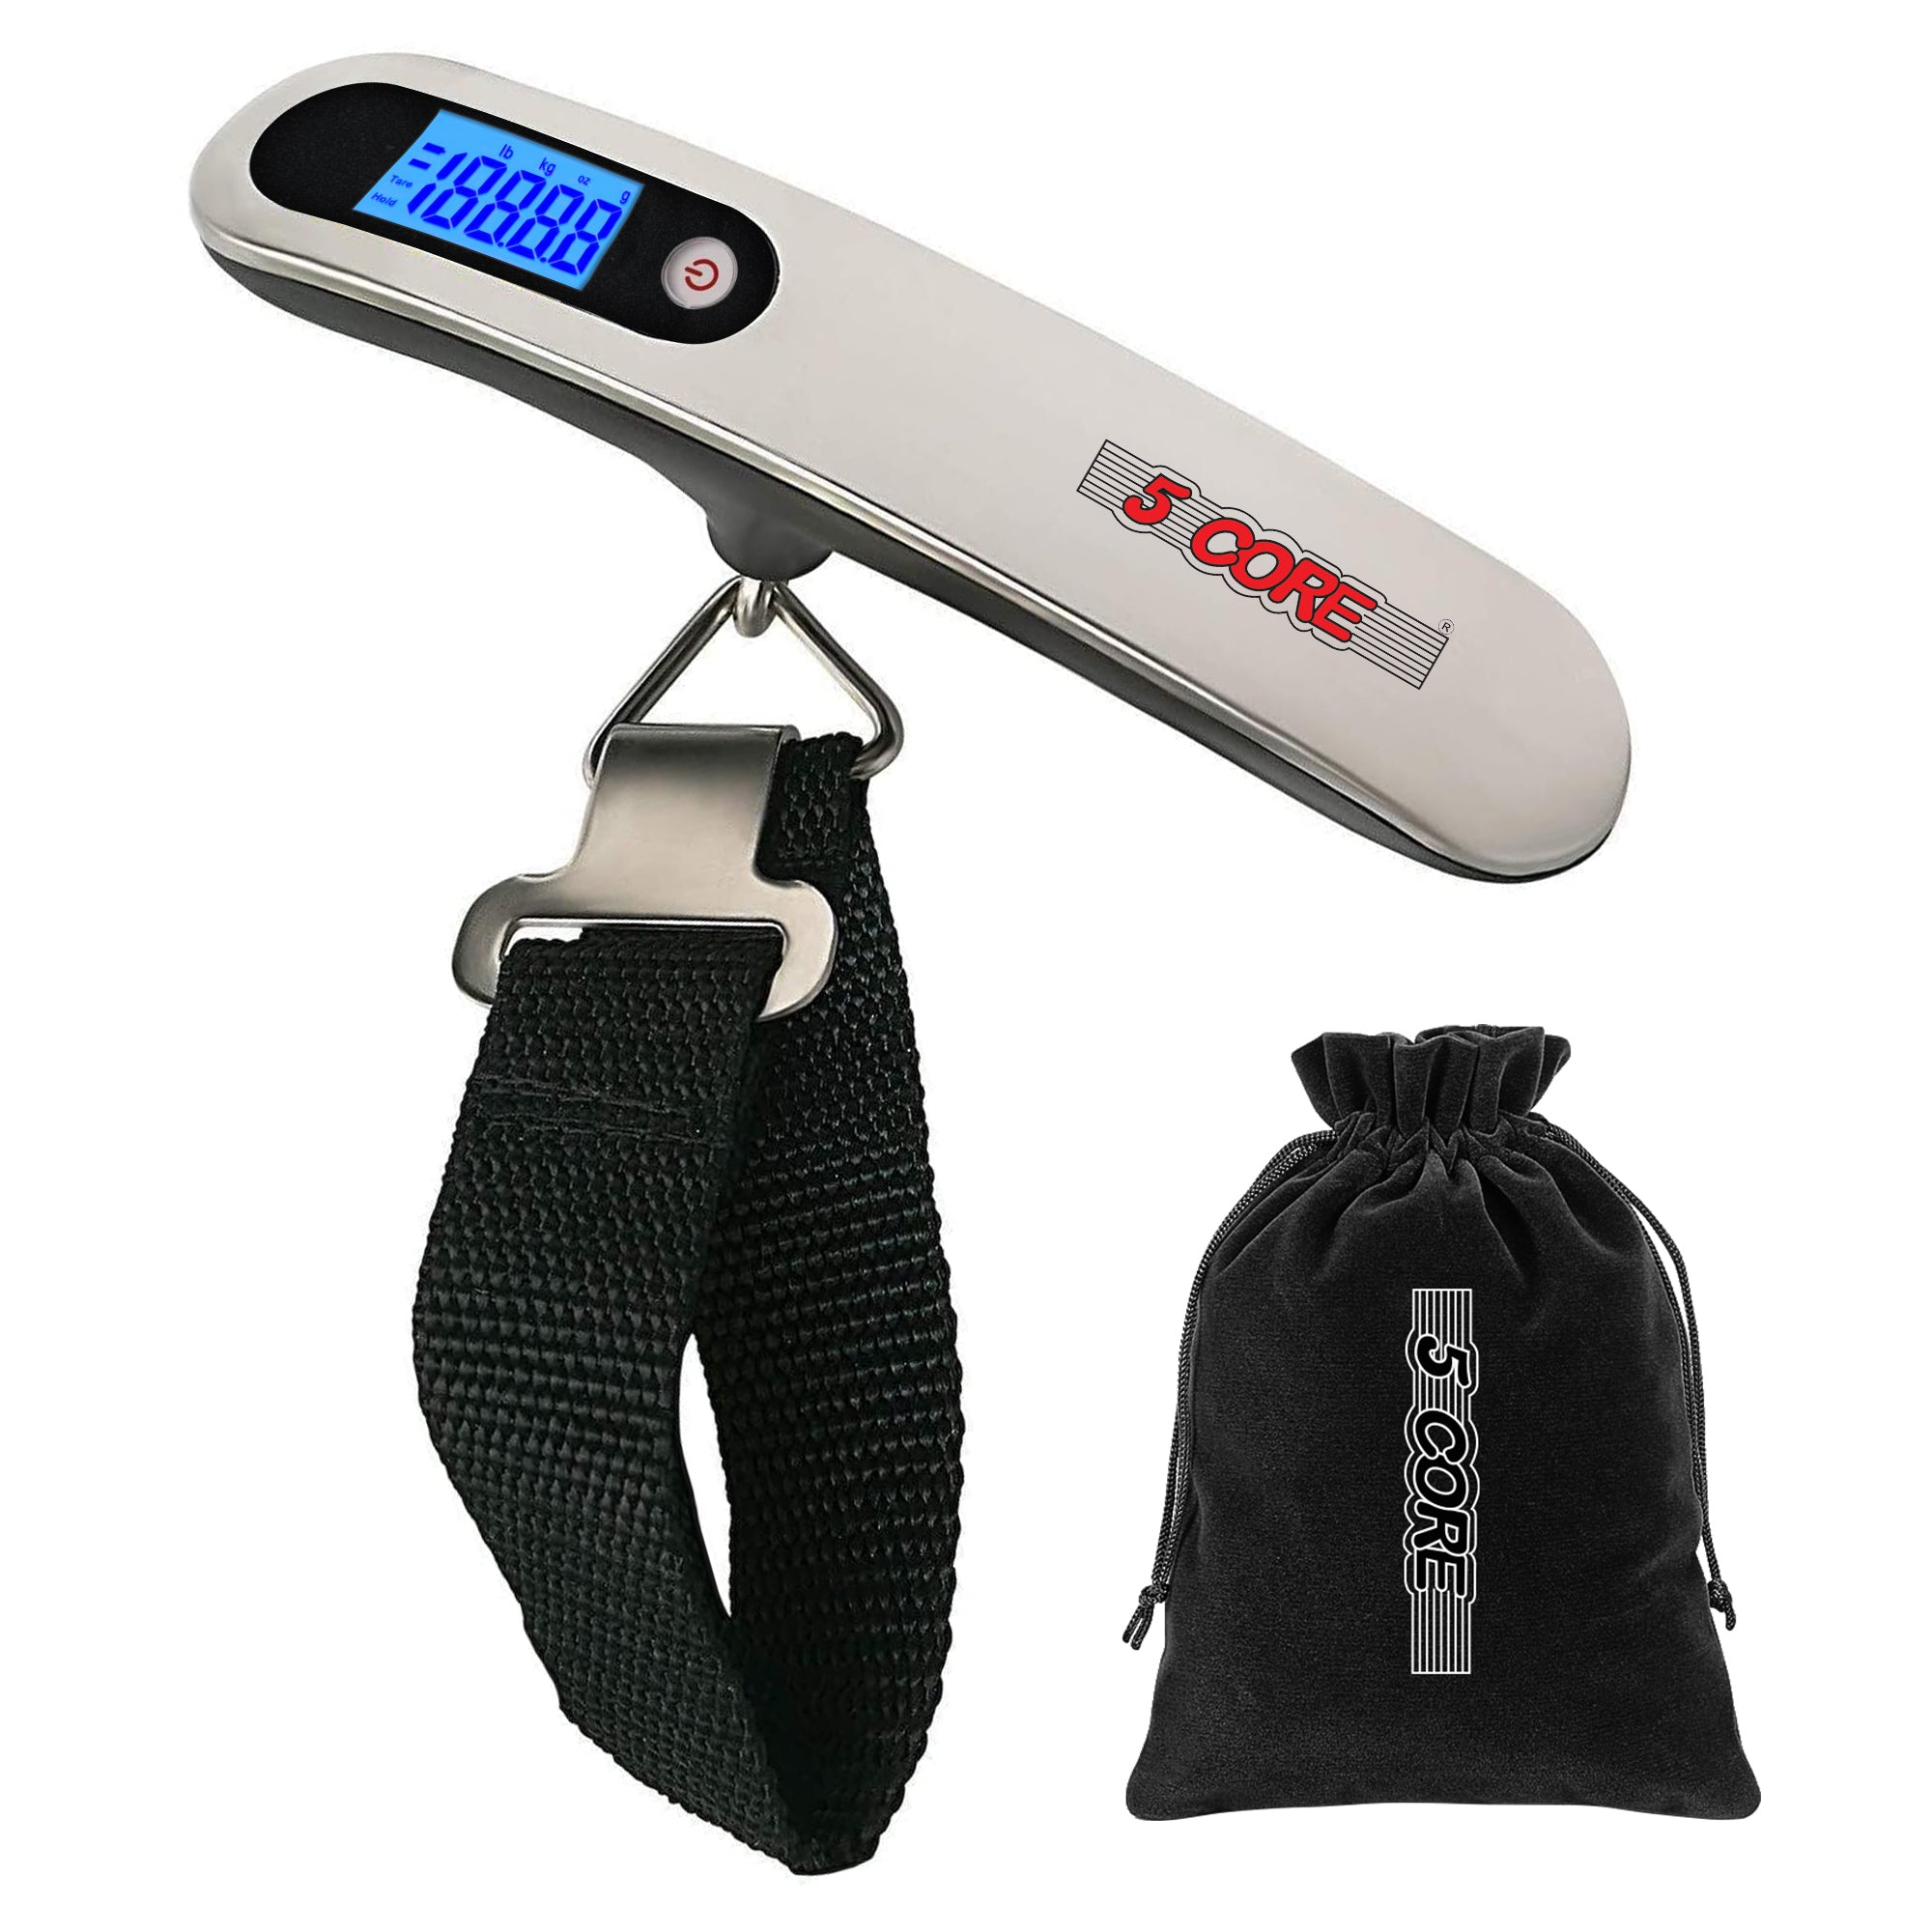 ® 2-PACK Digital Hanging Luggage Scale Large LCD Display 110 LB for Travel  and Home Use (Silver)